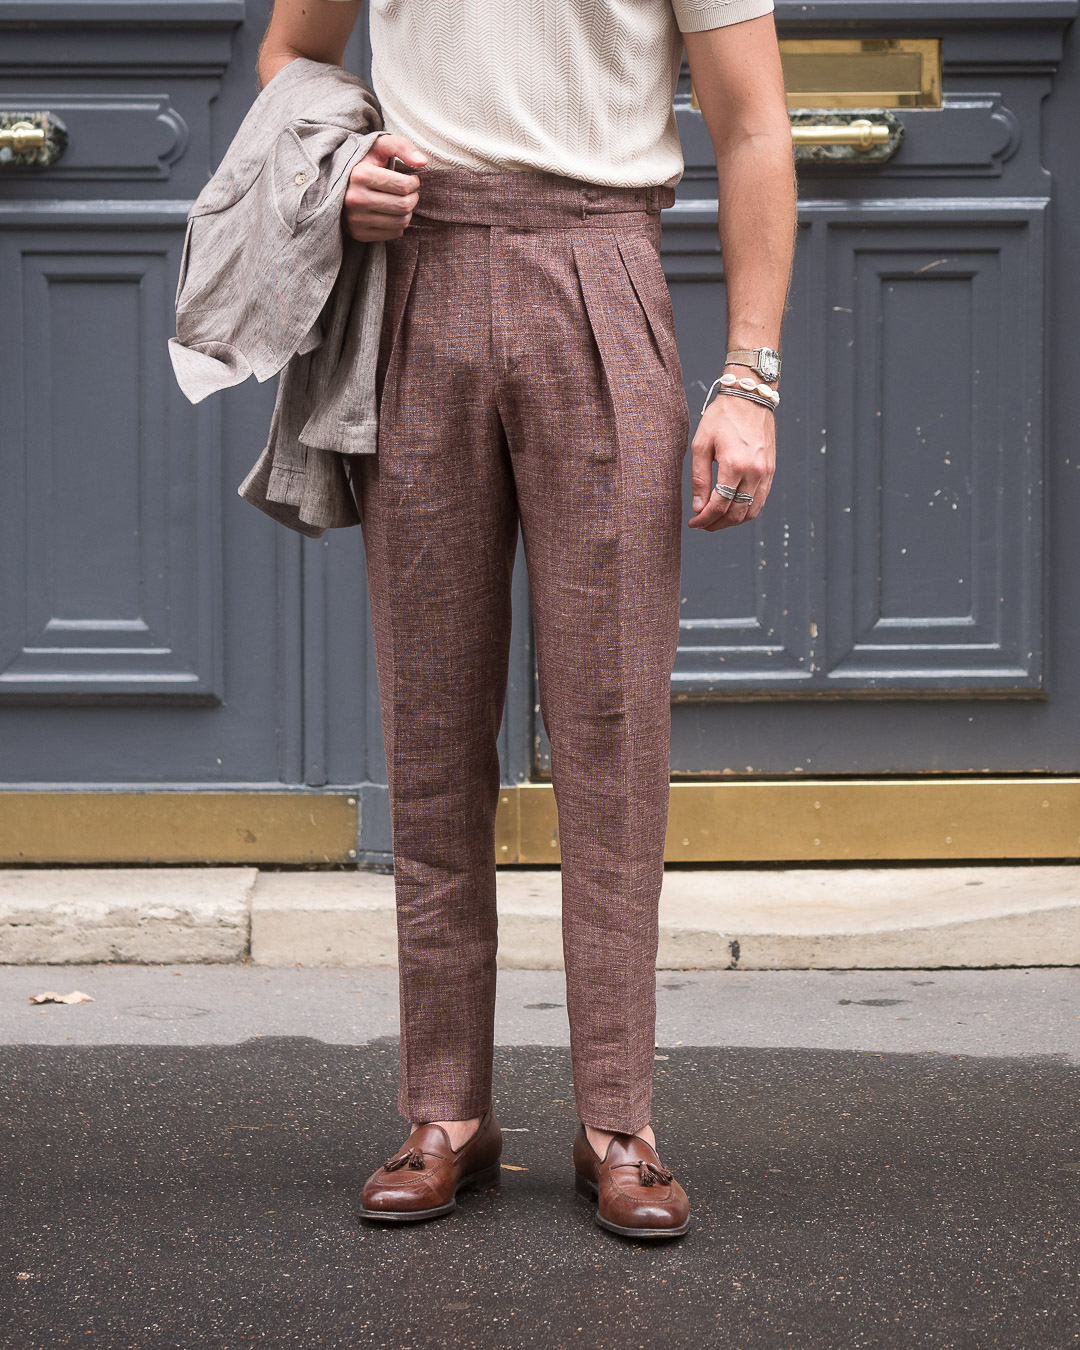 Rubinacci Manny Tapered Pleated Linen Trousers, $215 | MR PORTER | Lookastic